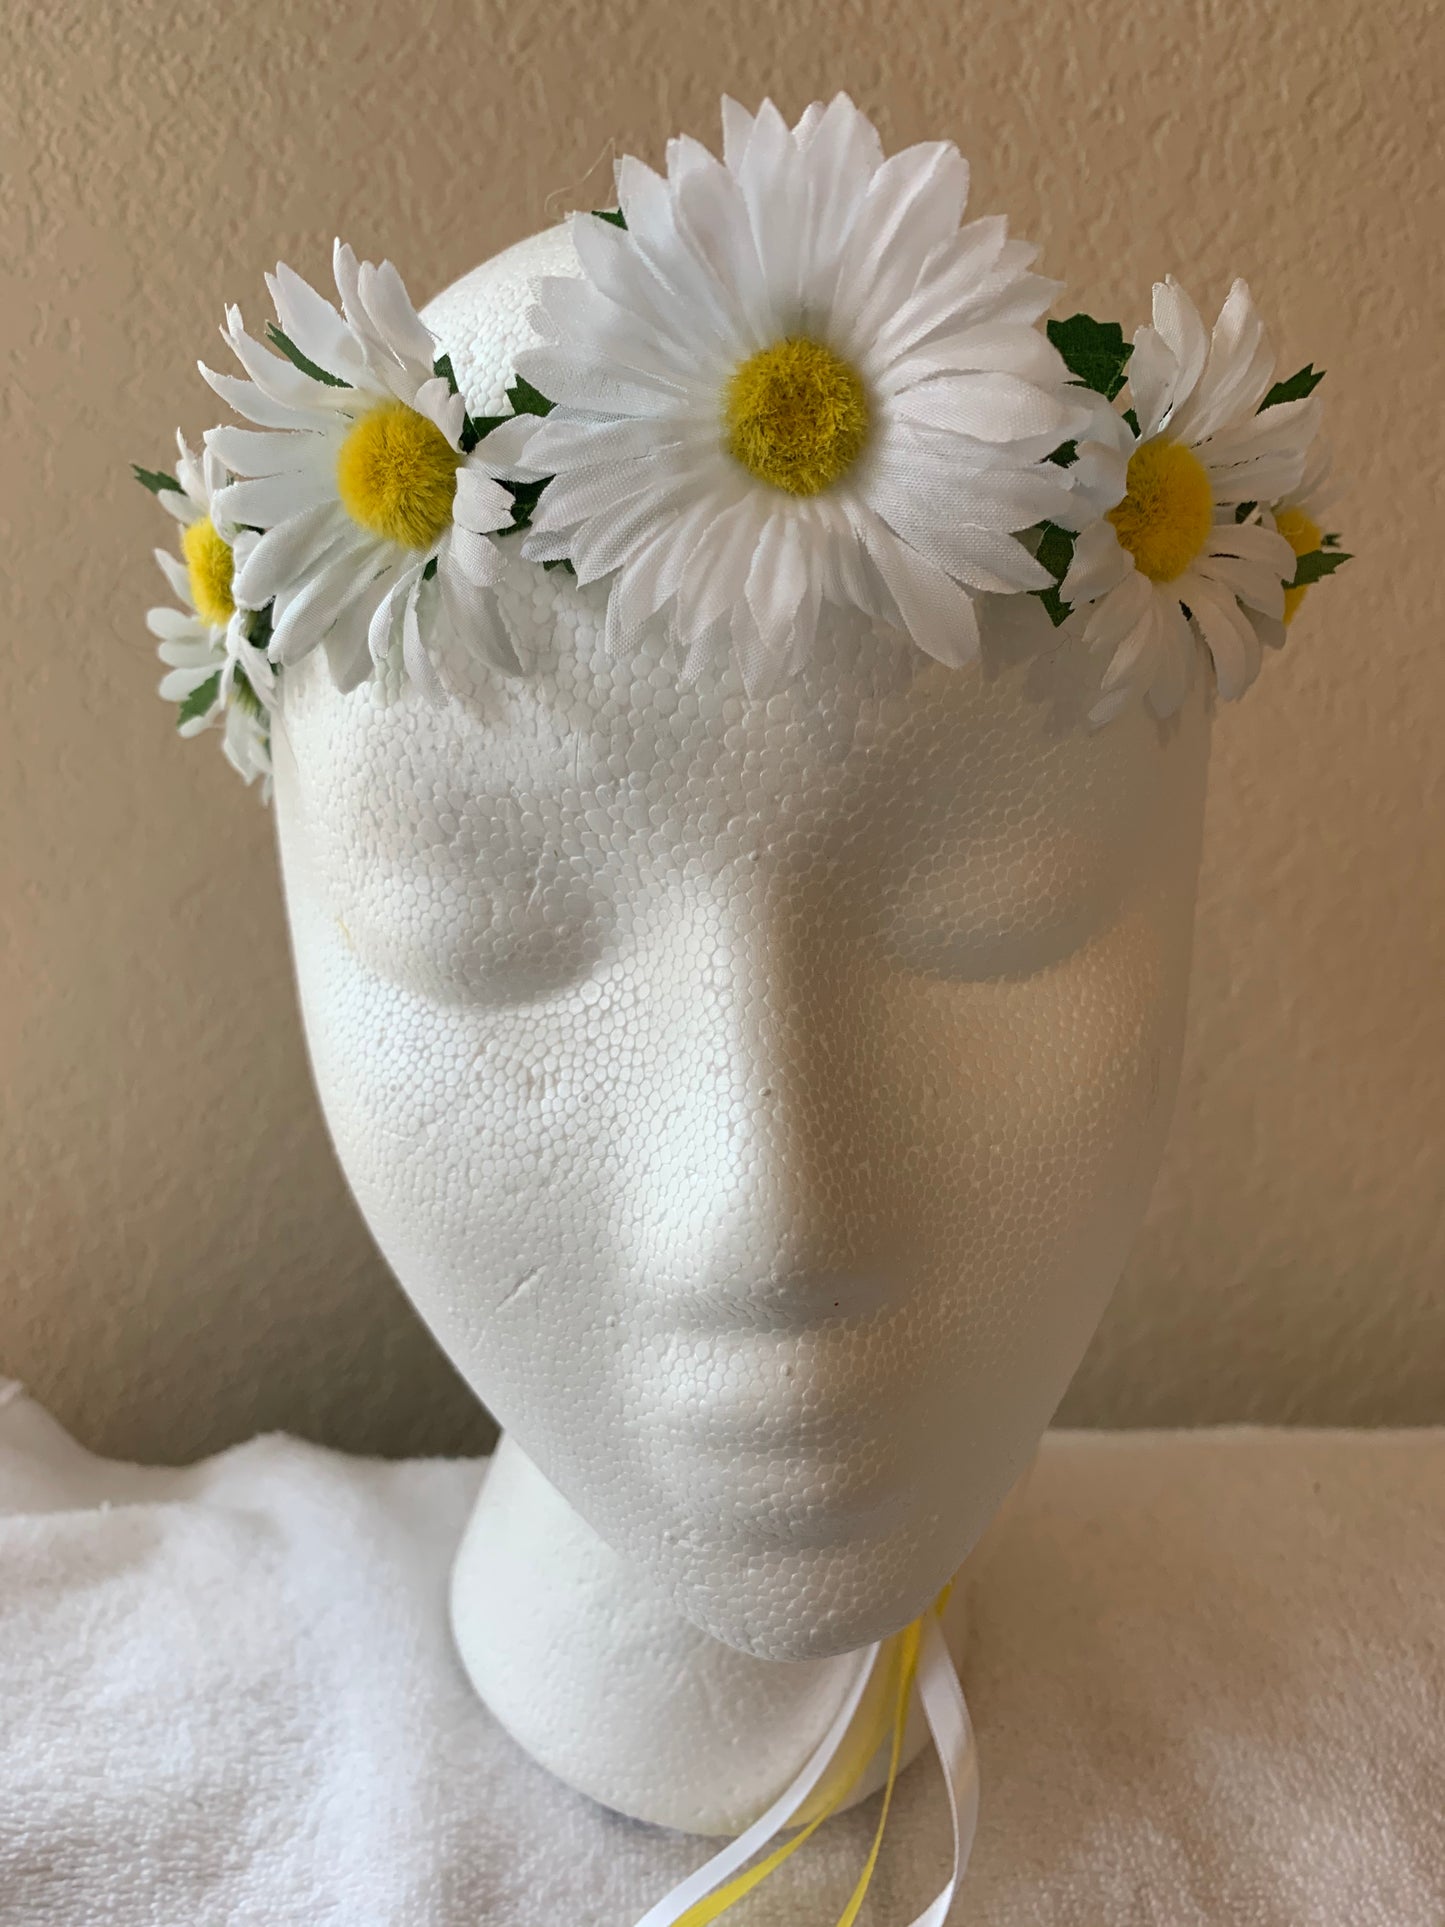 Extra Small Wreath - Large White Daisies